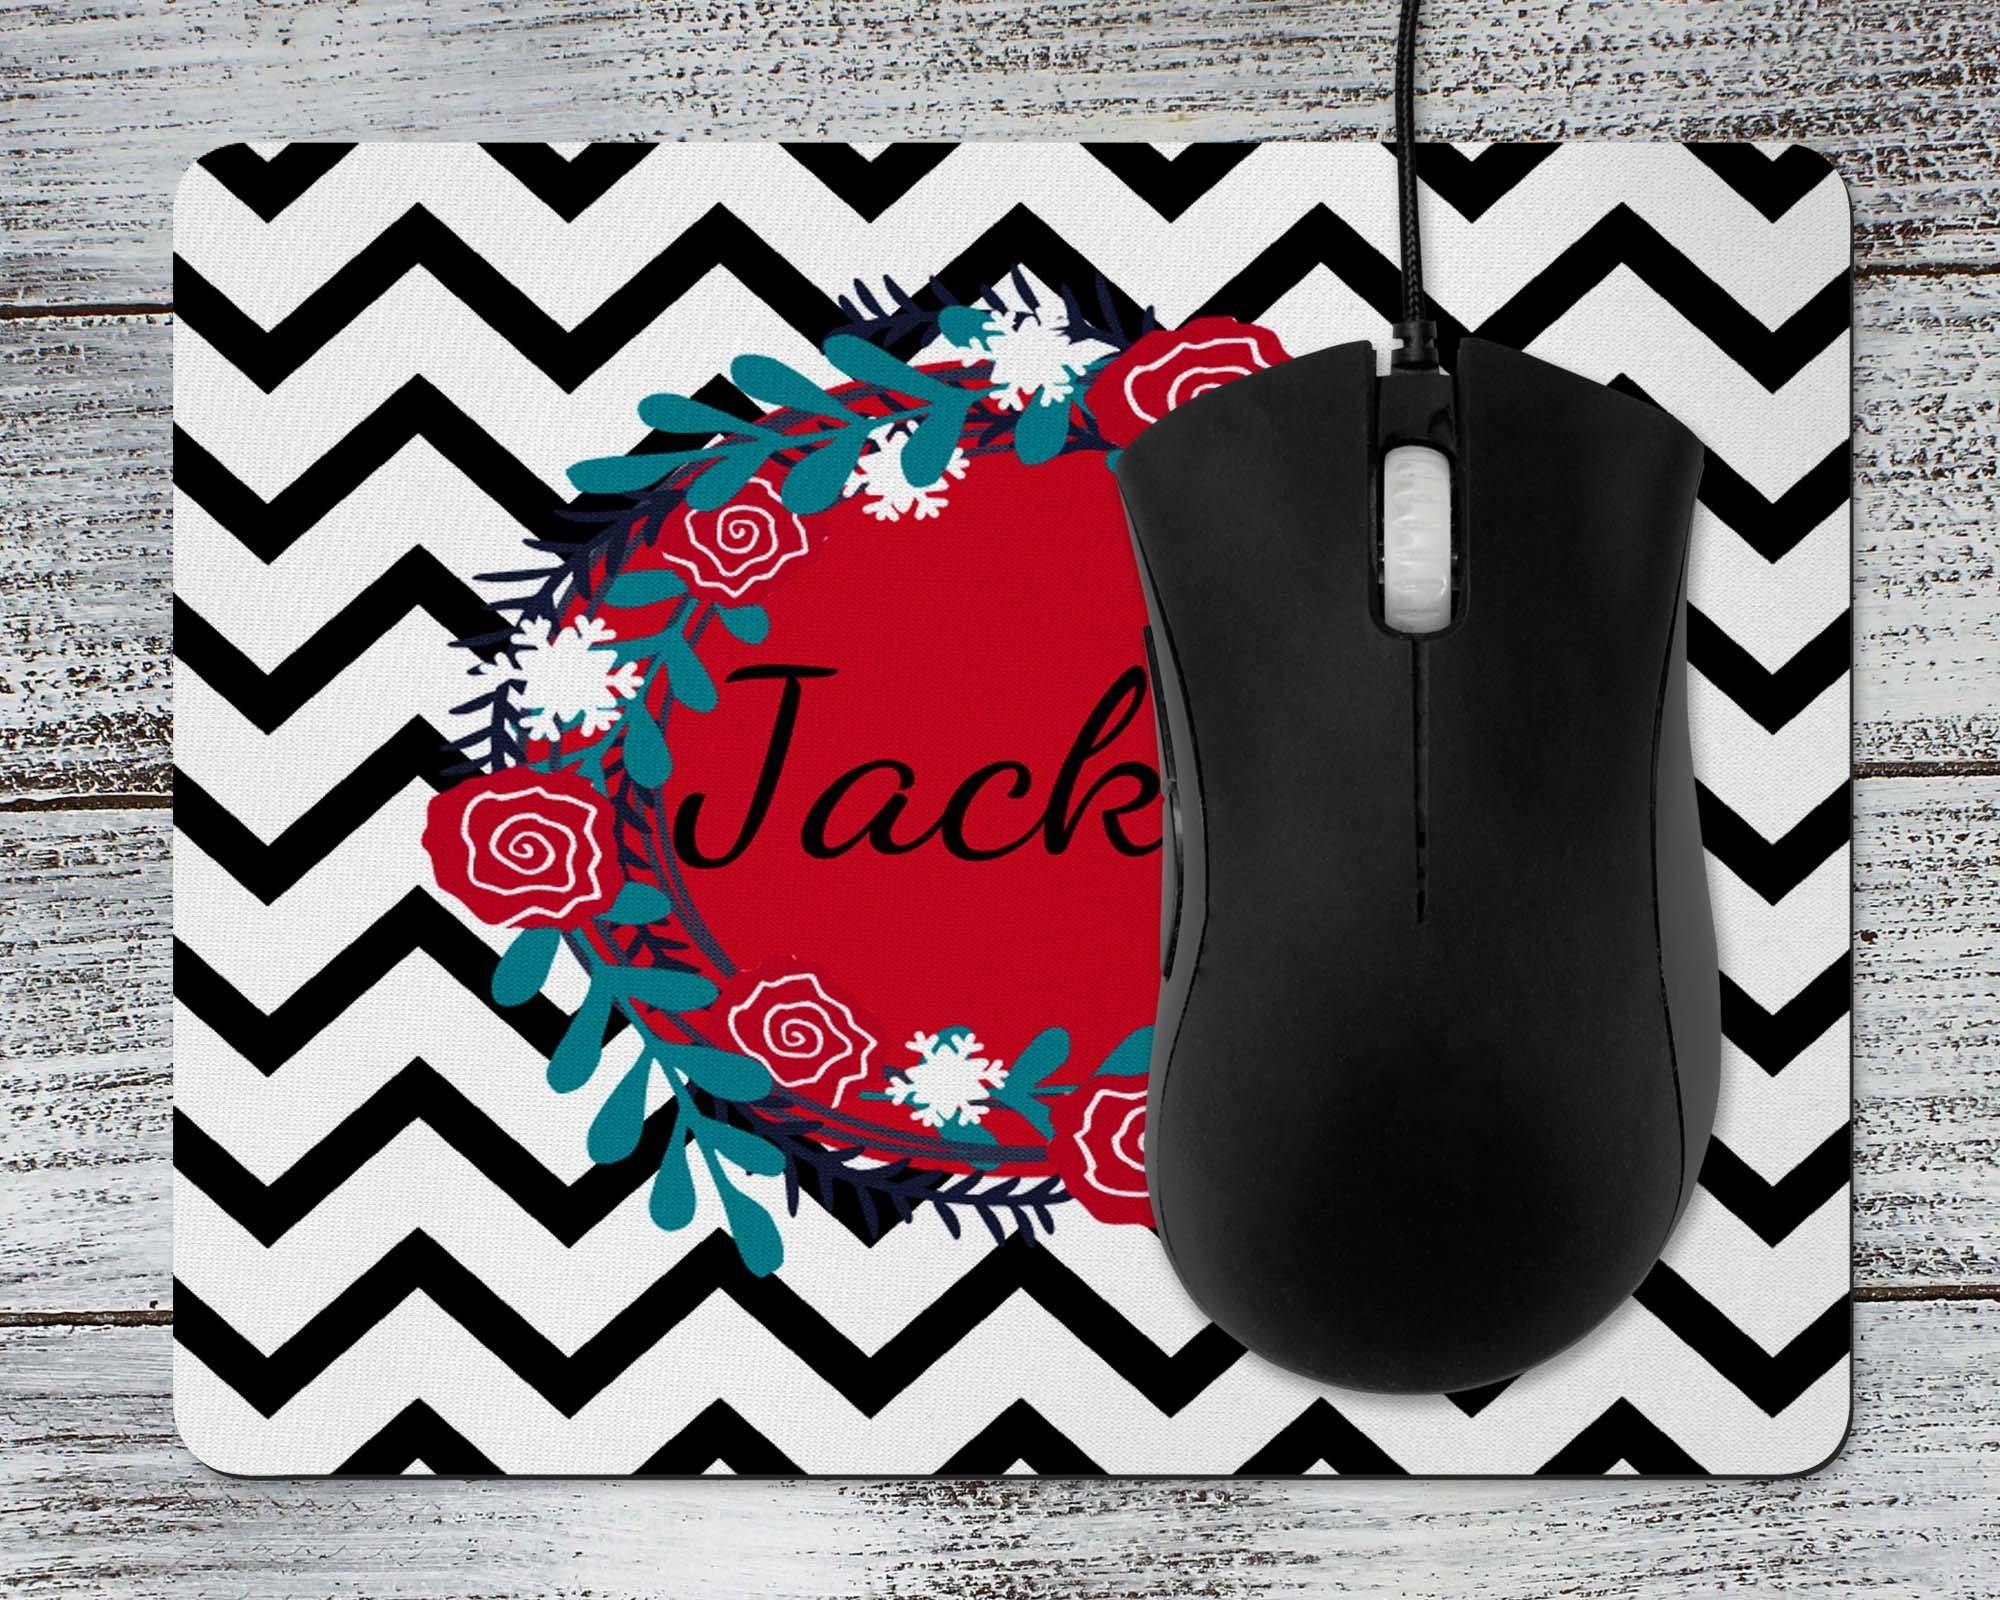 Monogrammed Mouse Pad | Personalized Mouse Pad | Black Chevron - This & That Solutions - Monogrammed Mouse Pad | Personalized Mouse Pad | Black Chevron - Personalized Gifts & Custom Home Decor